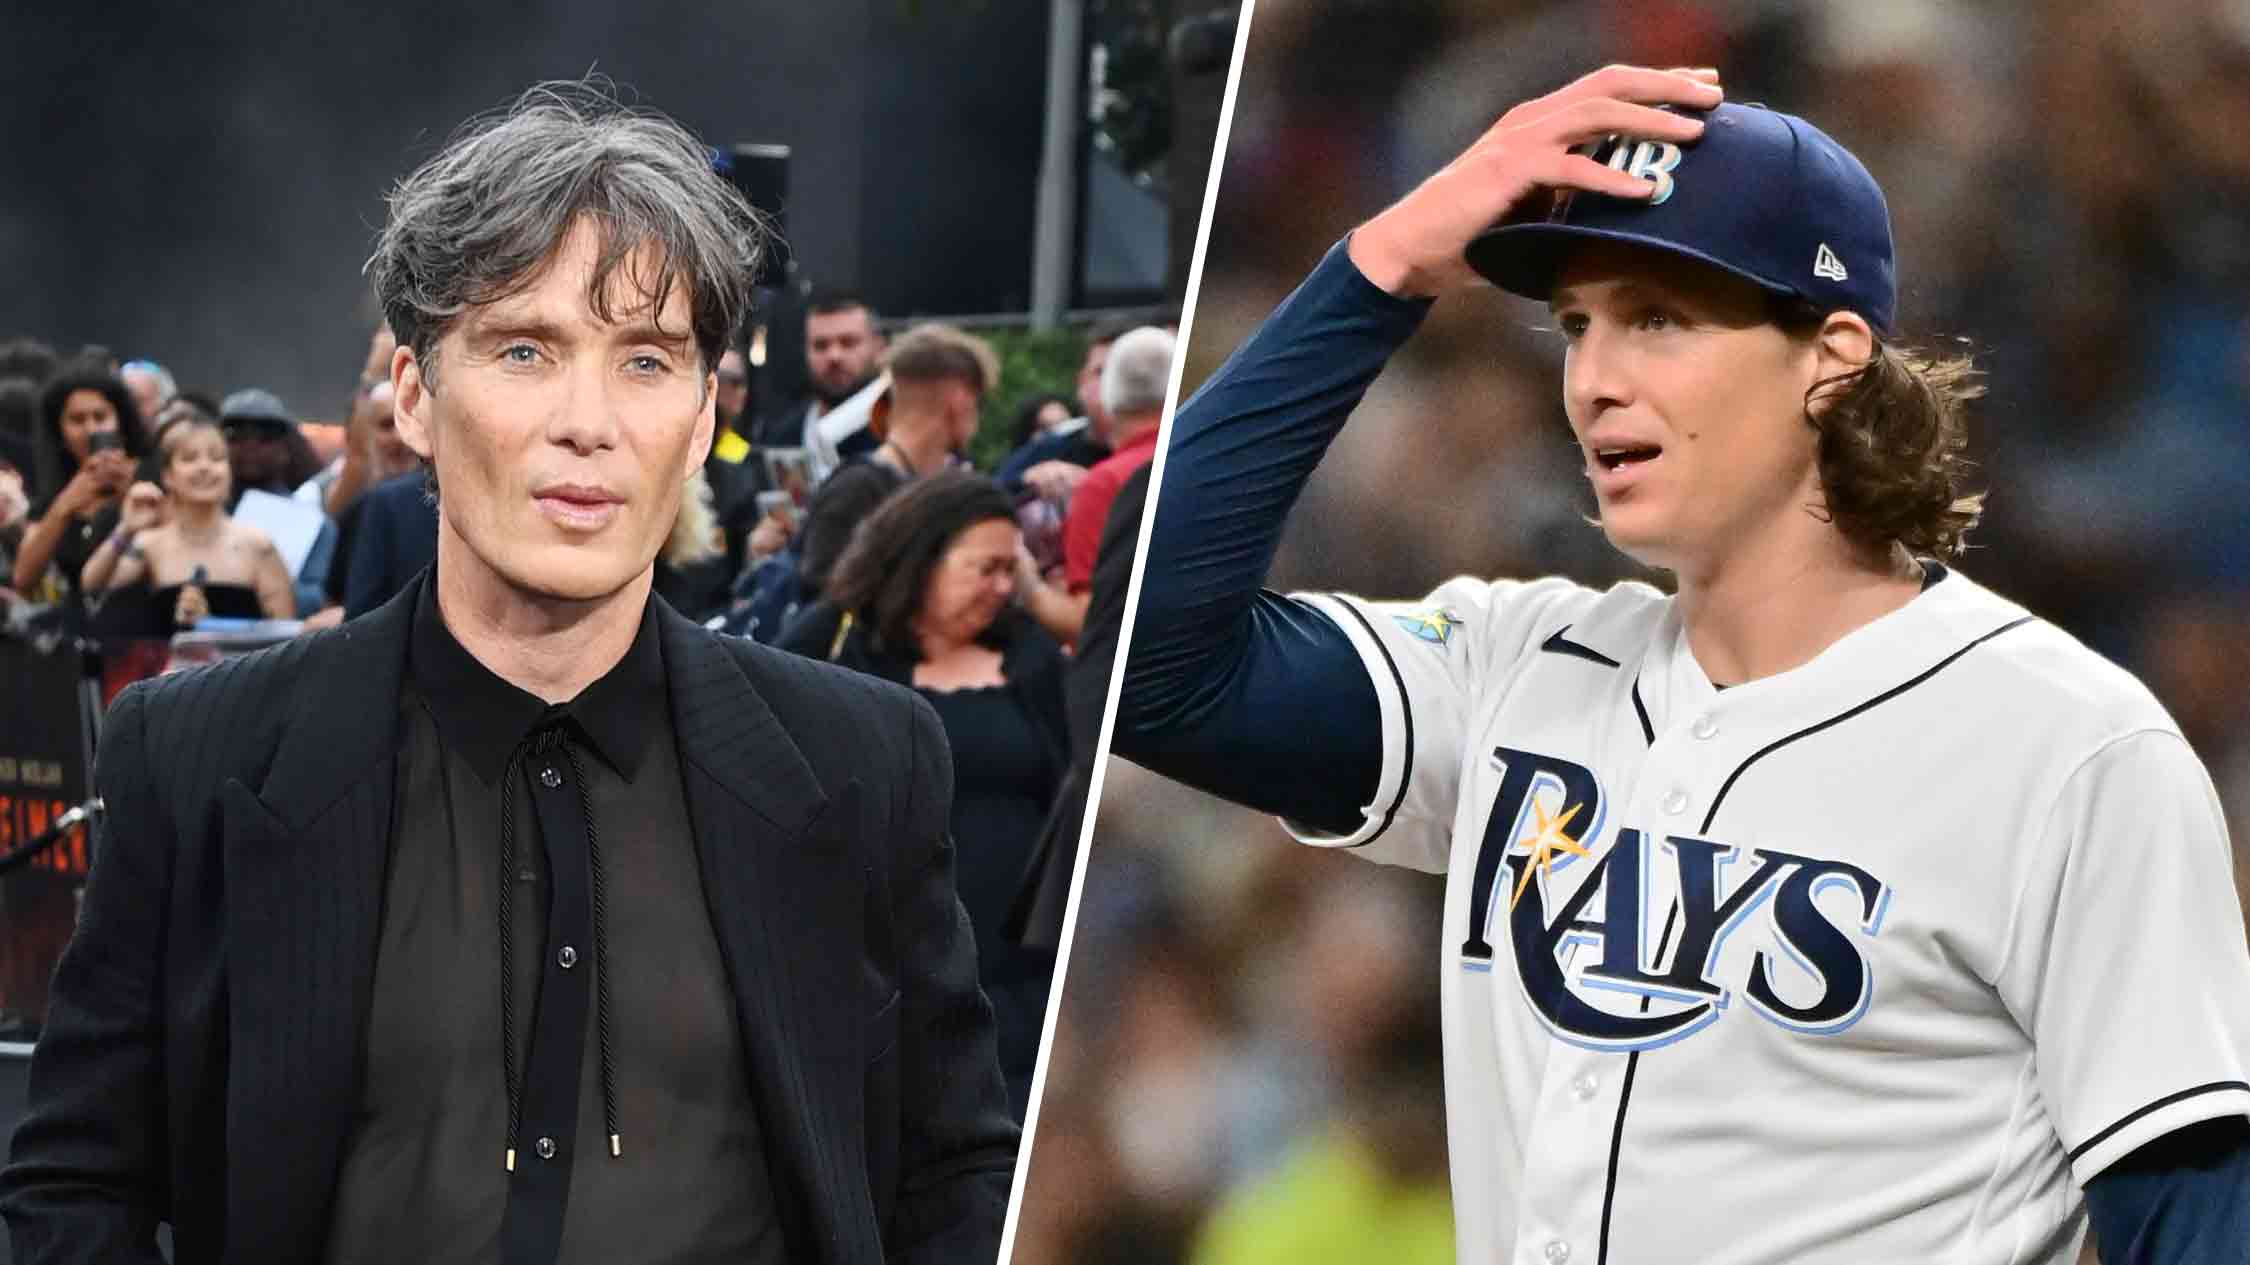 Days After Tampa Bay Rays Lookalike Went Viral, Cillian Murphy